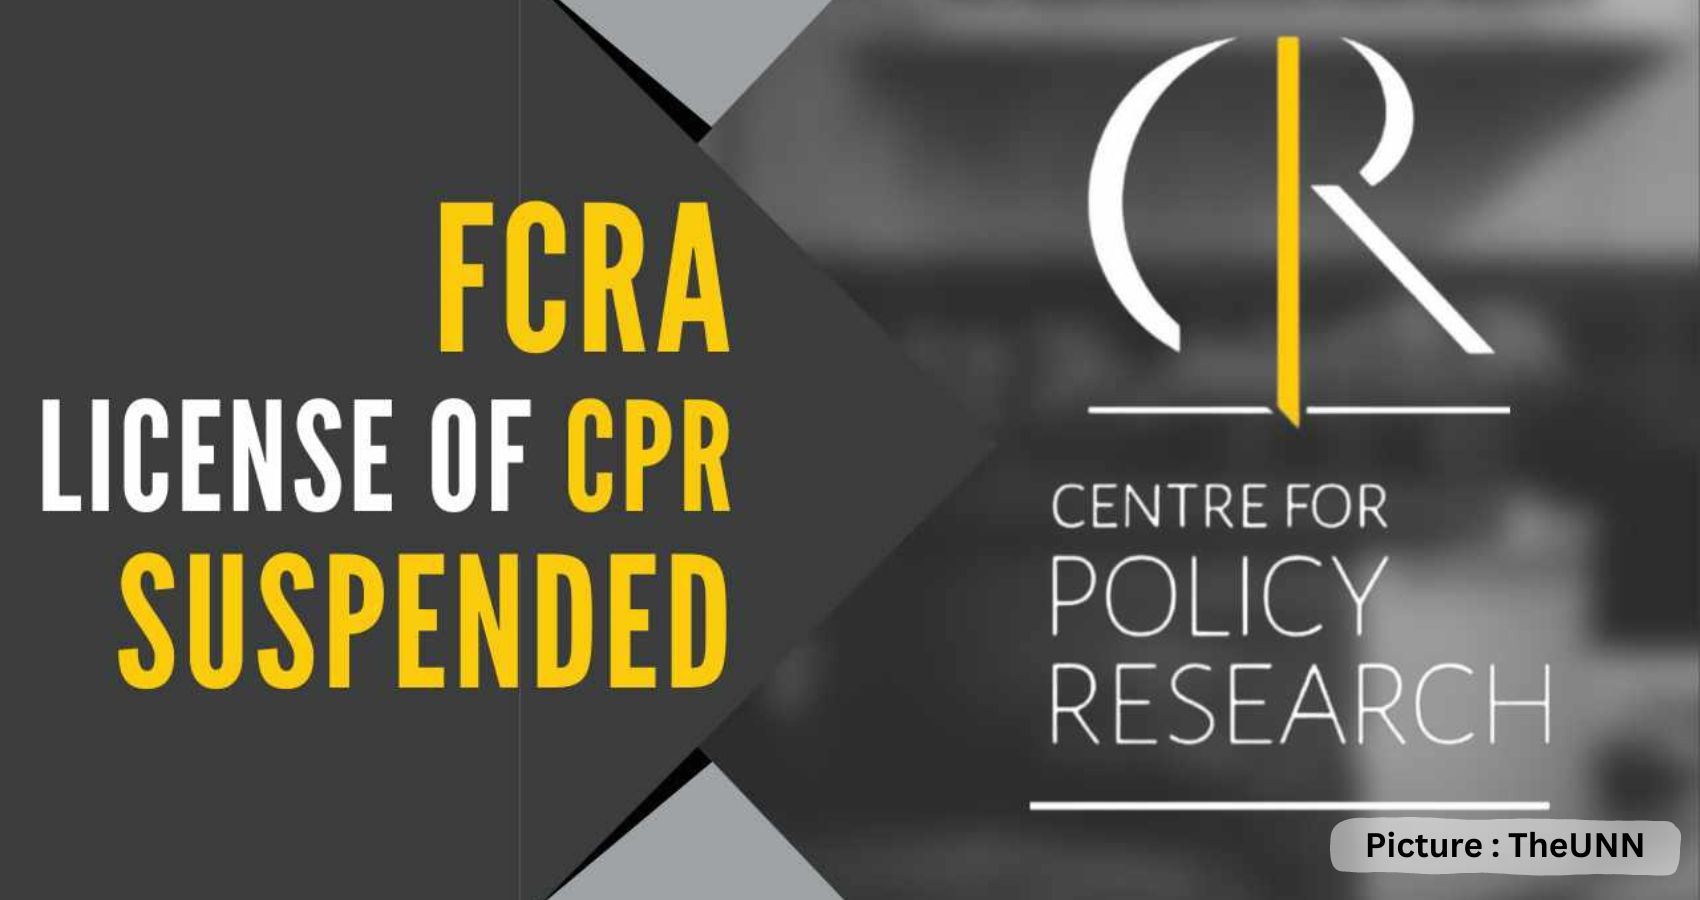 Think Tank CPR’s FCRA Suspended, Gets I-T Notice On Tax Exemptions